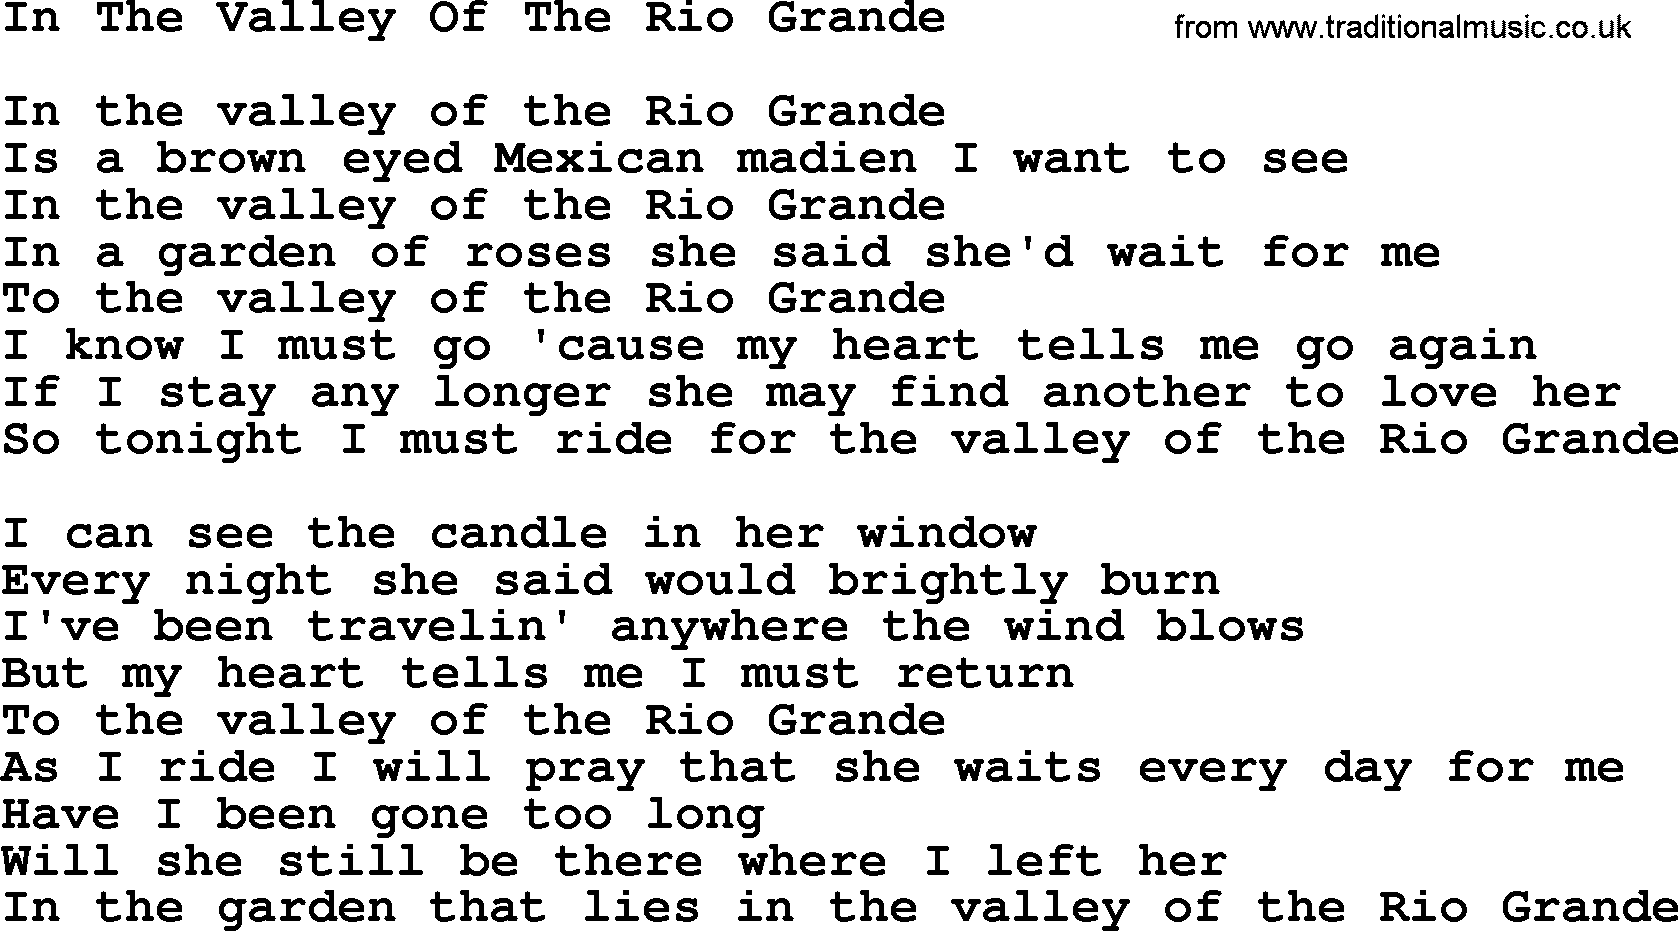 Marty Robbins song: In The Valley Of The Rio Grande, lyrics